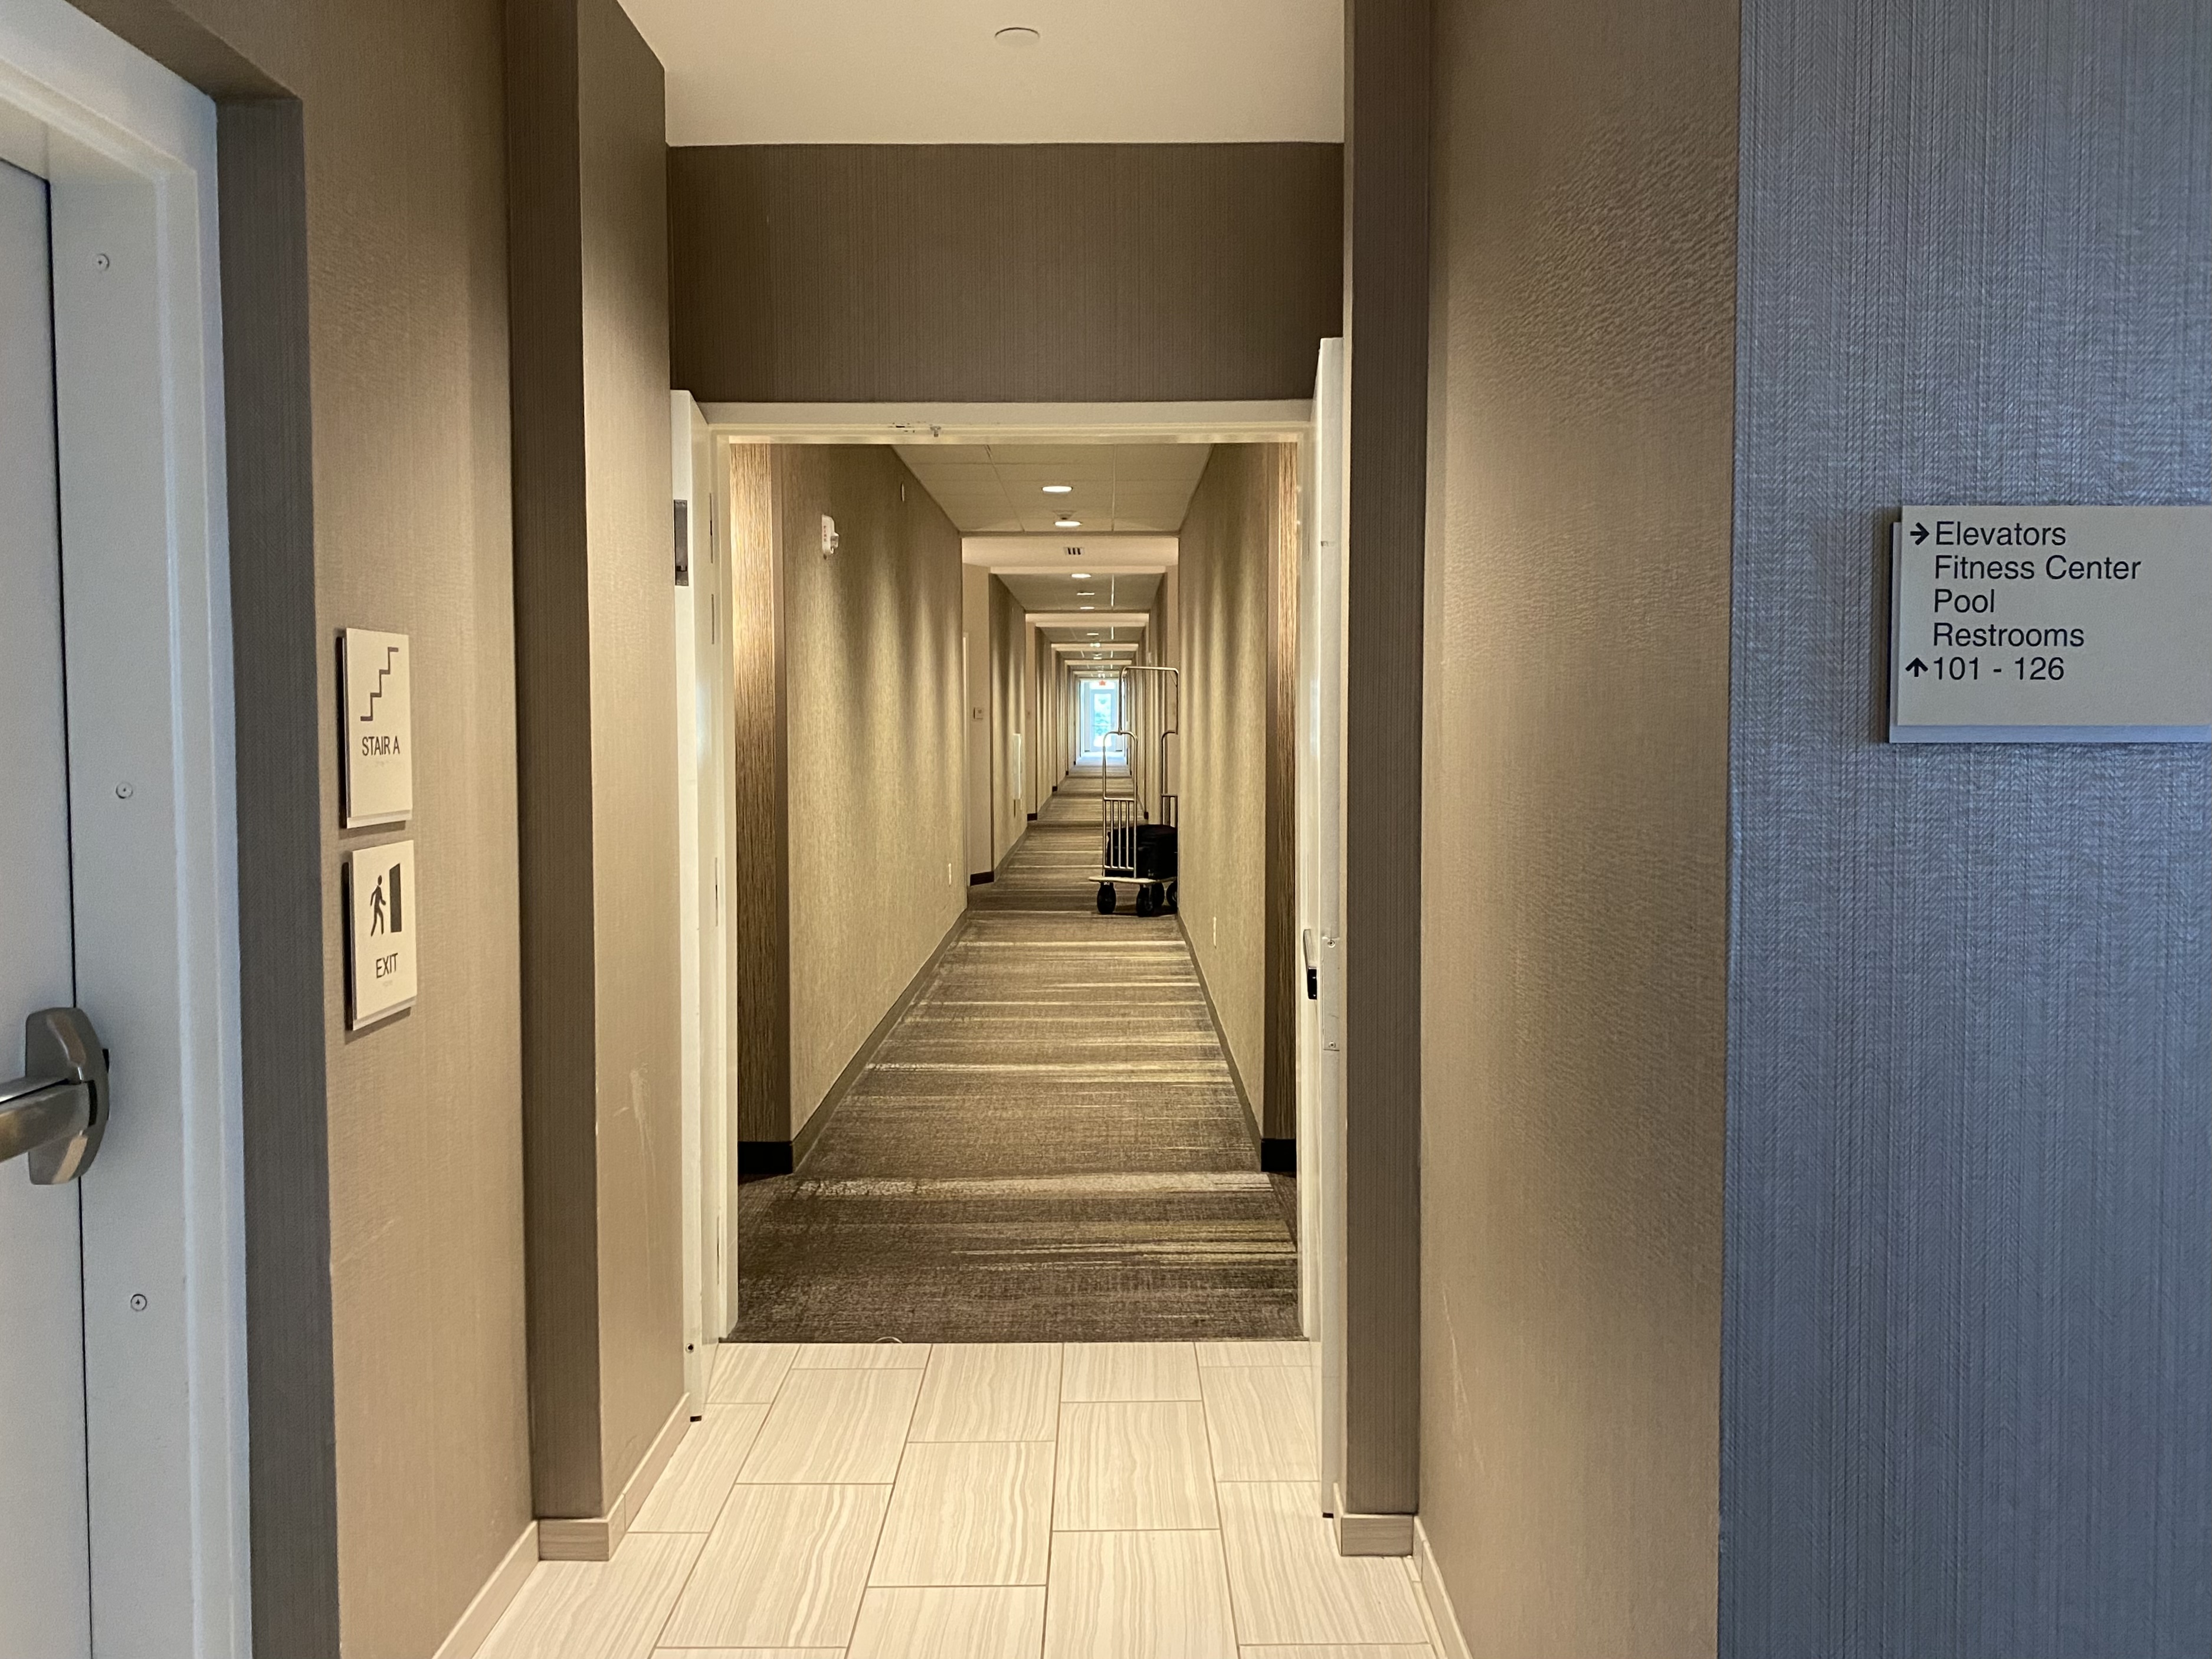 The hotel decor
      is grey and beige but the hallways are clean.